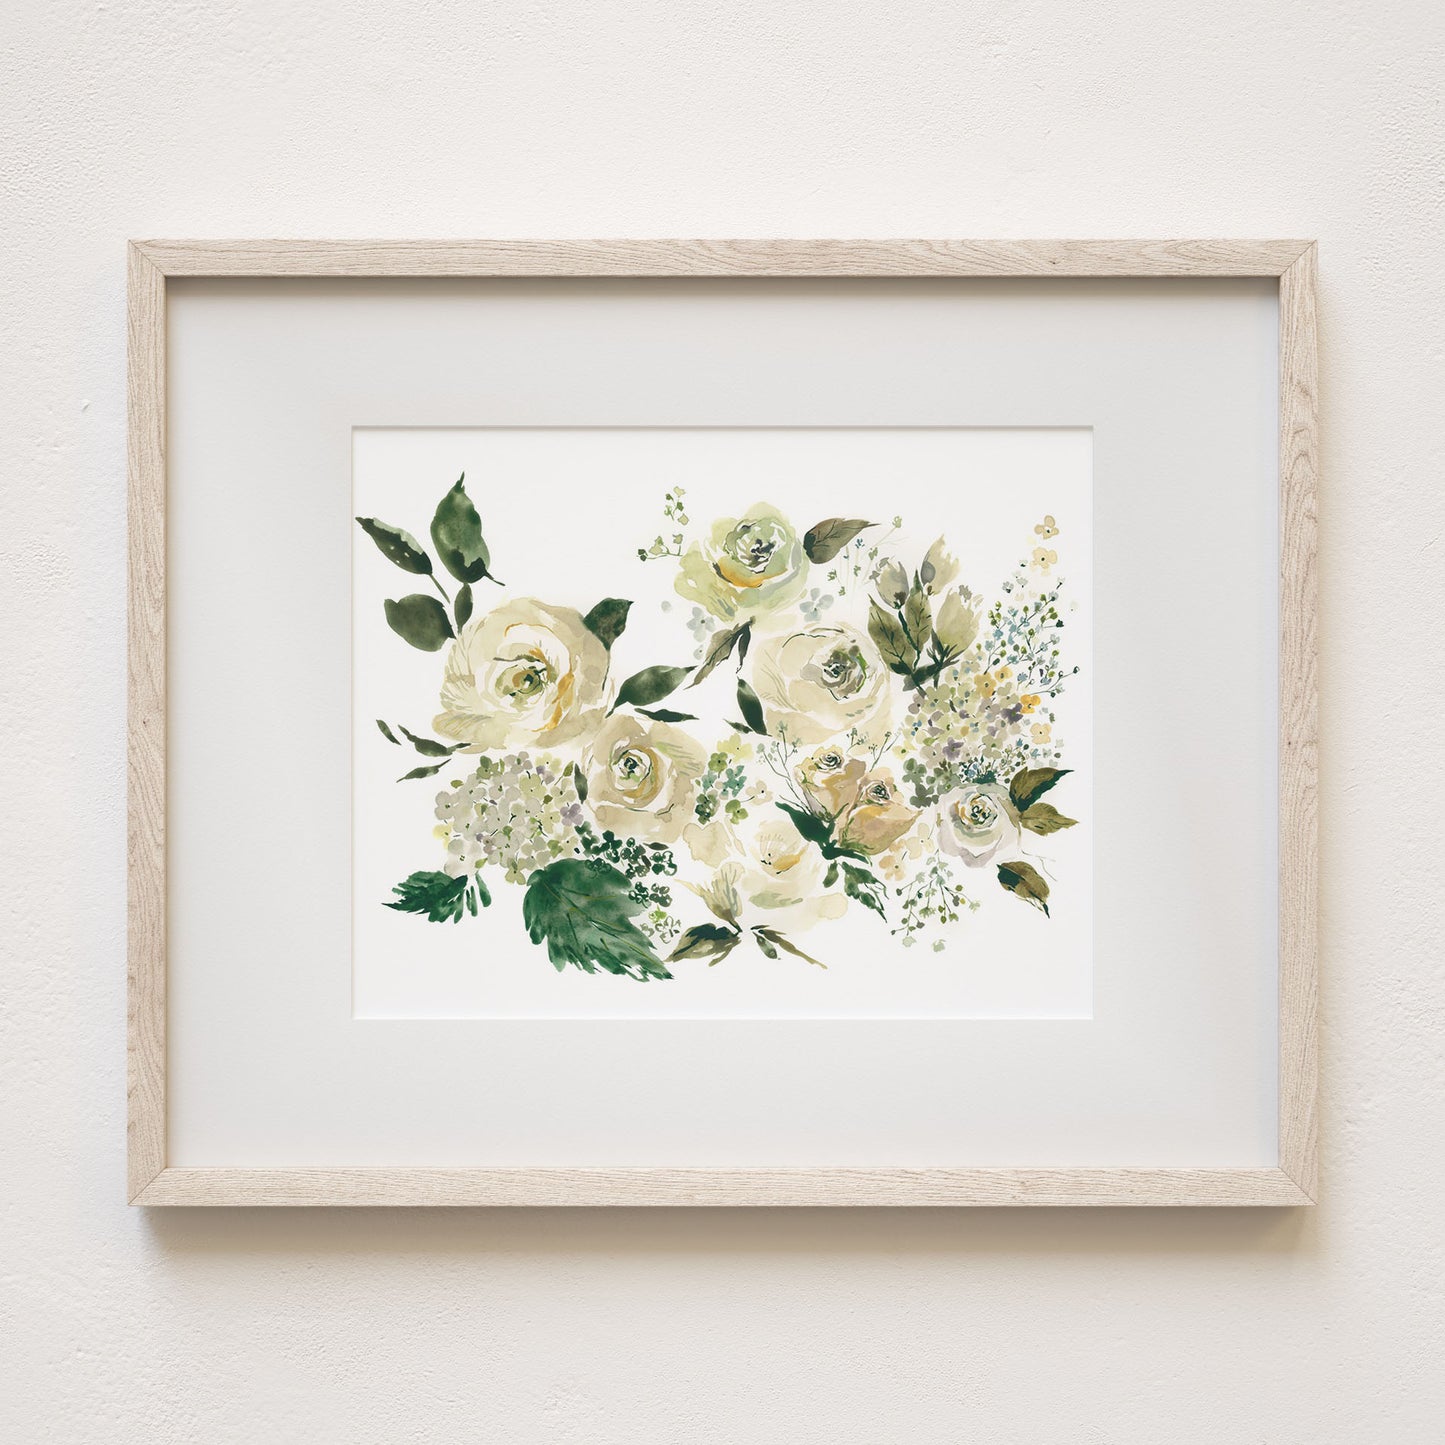 Jacob white roses art print, 8x10" with mat and frame